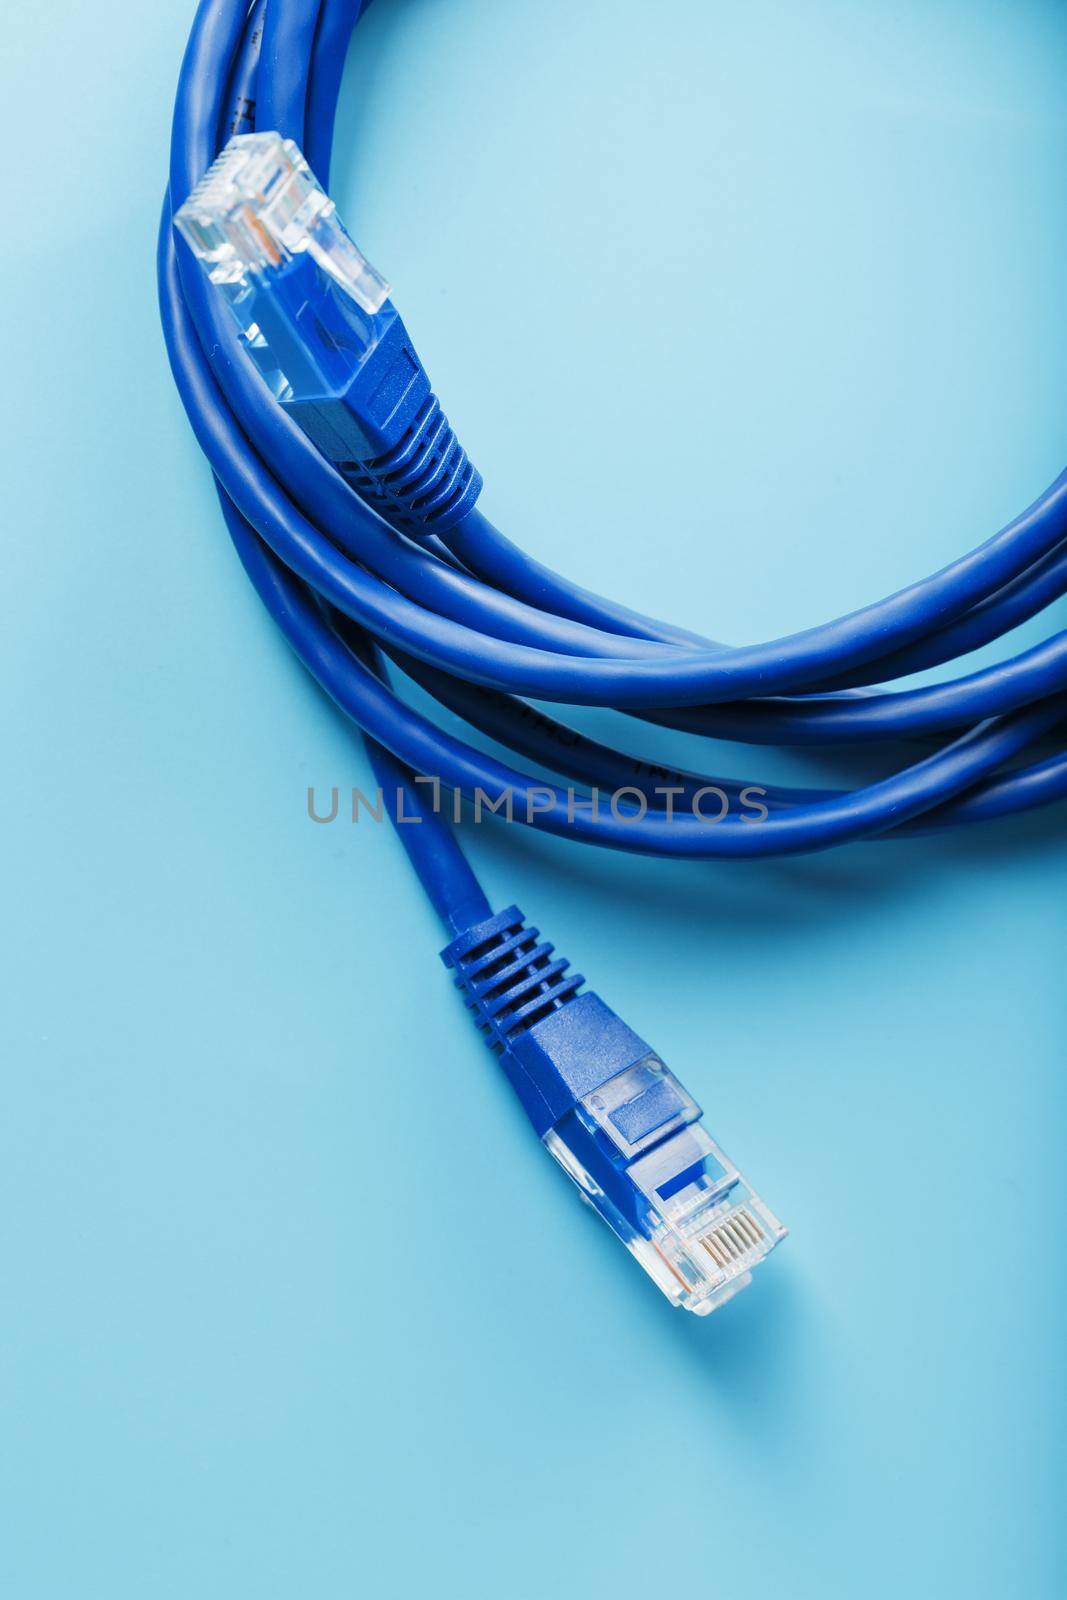 Two Ethernet Cable Connectors Patch cord cord close-up isolated on a blue background with free space by AlexGrec